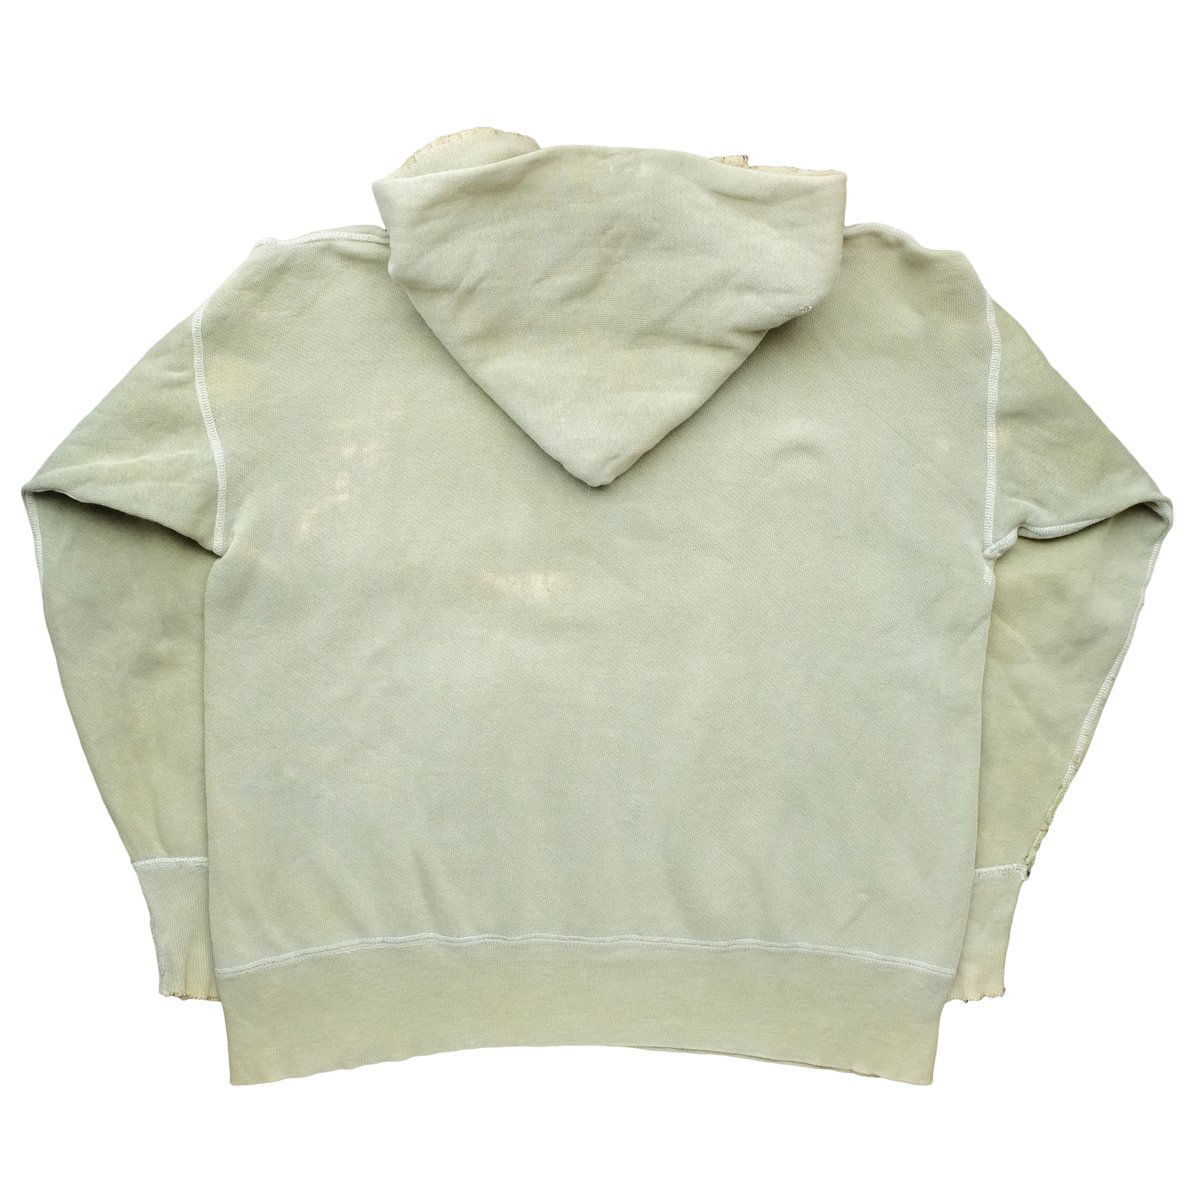 Image of 50s/60s Vintage Sunfaded Green Hoodie